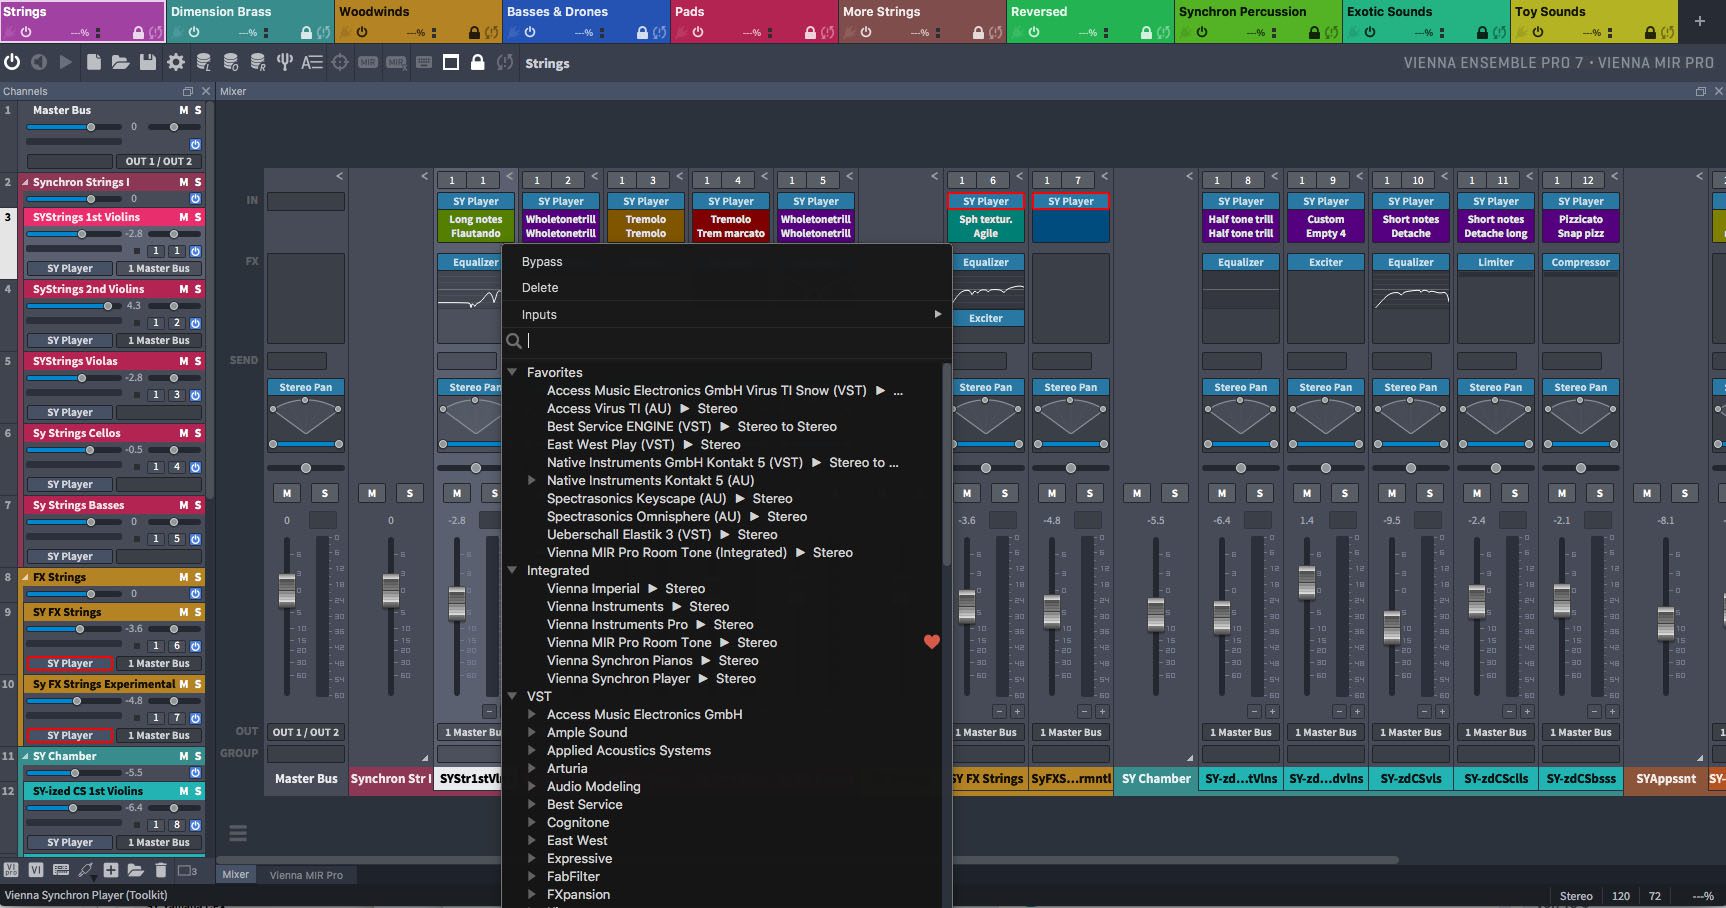 Software instruments and plug-ins in Vienna Ensemble Pro 7